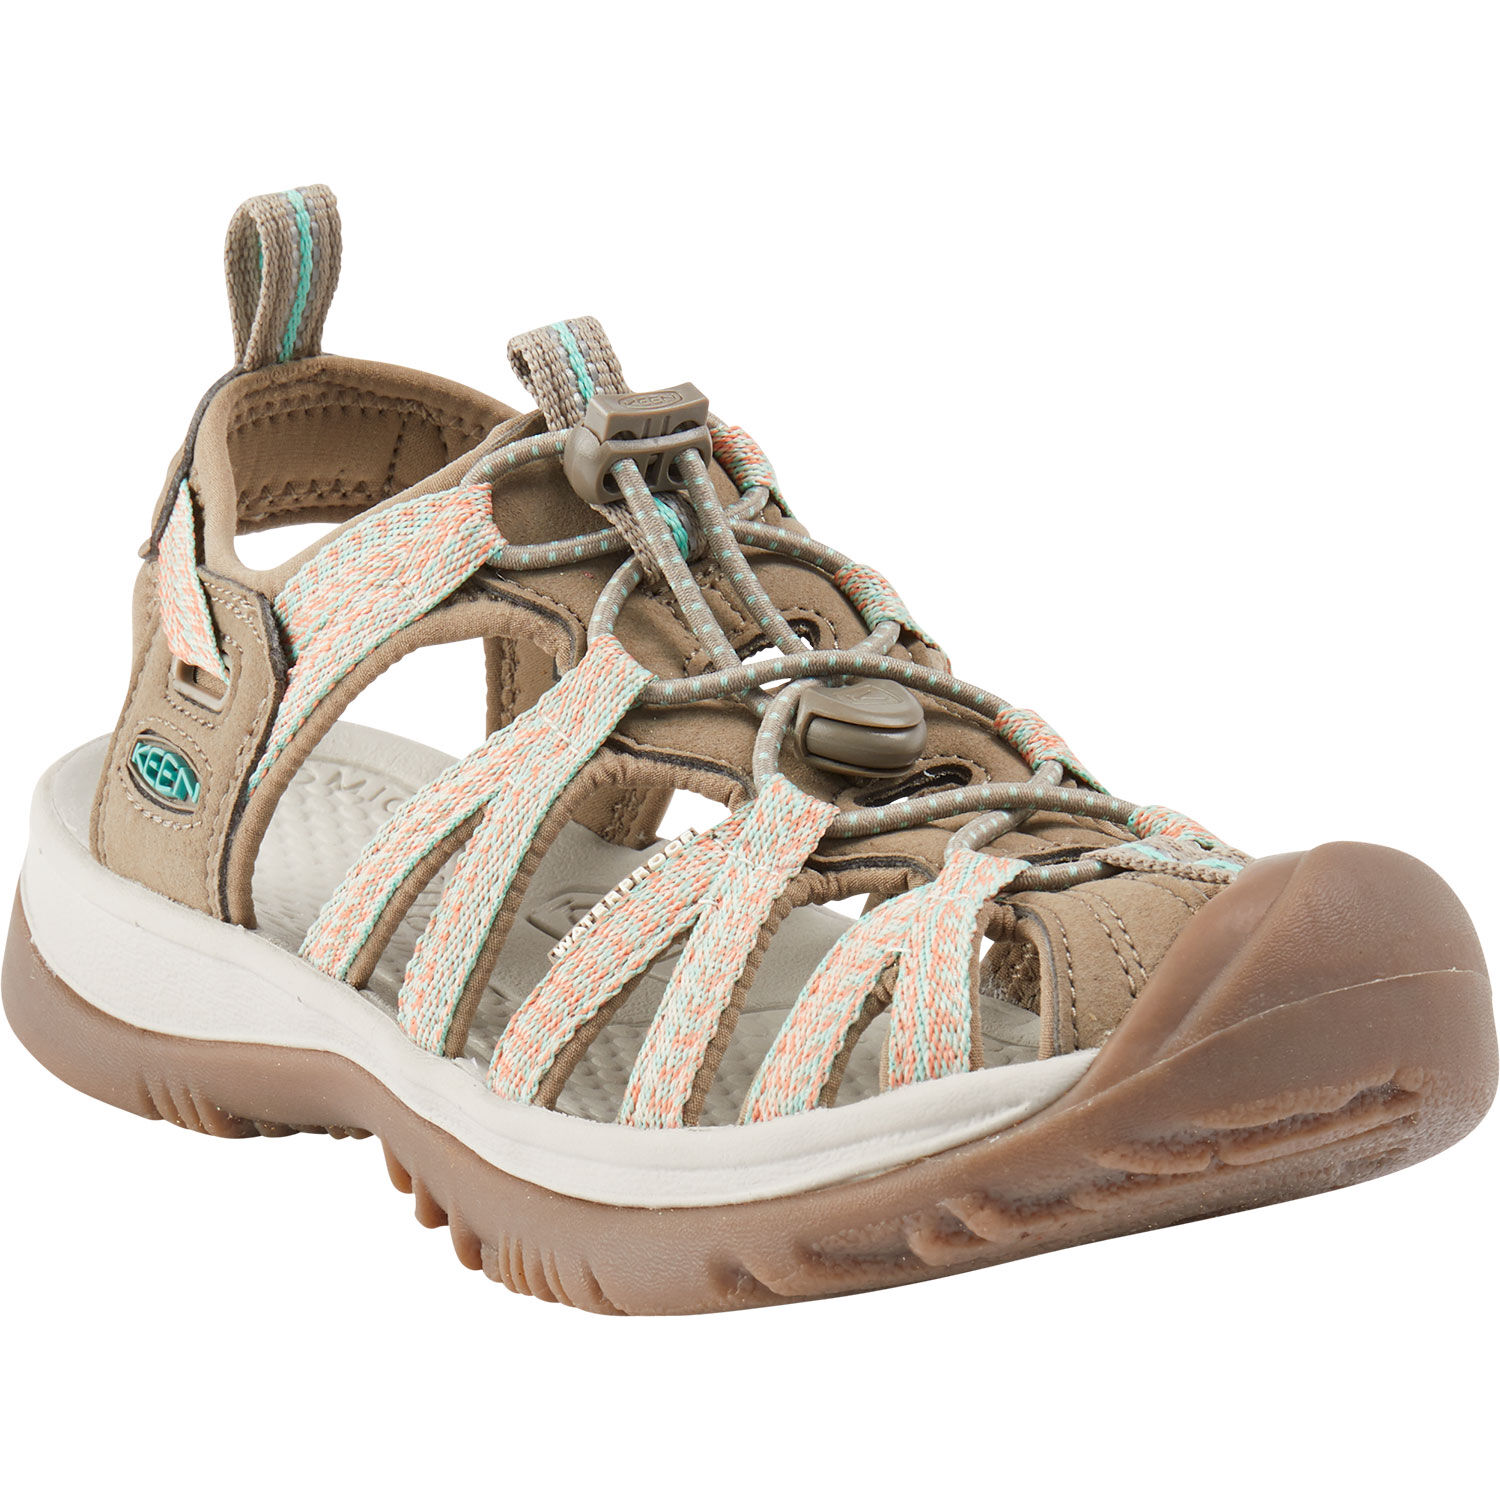 Women's KEEN Hiking Shoes | Nordstrom